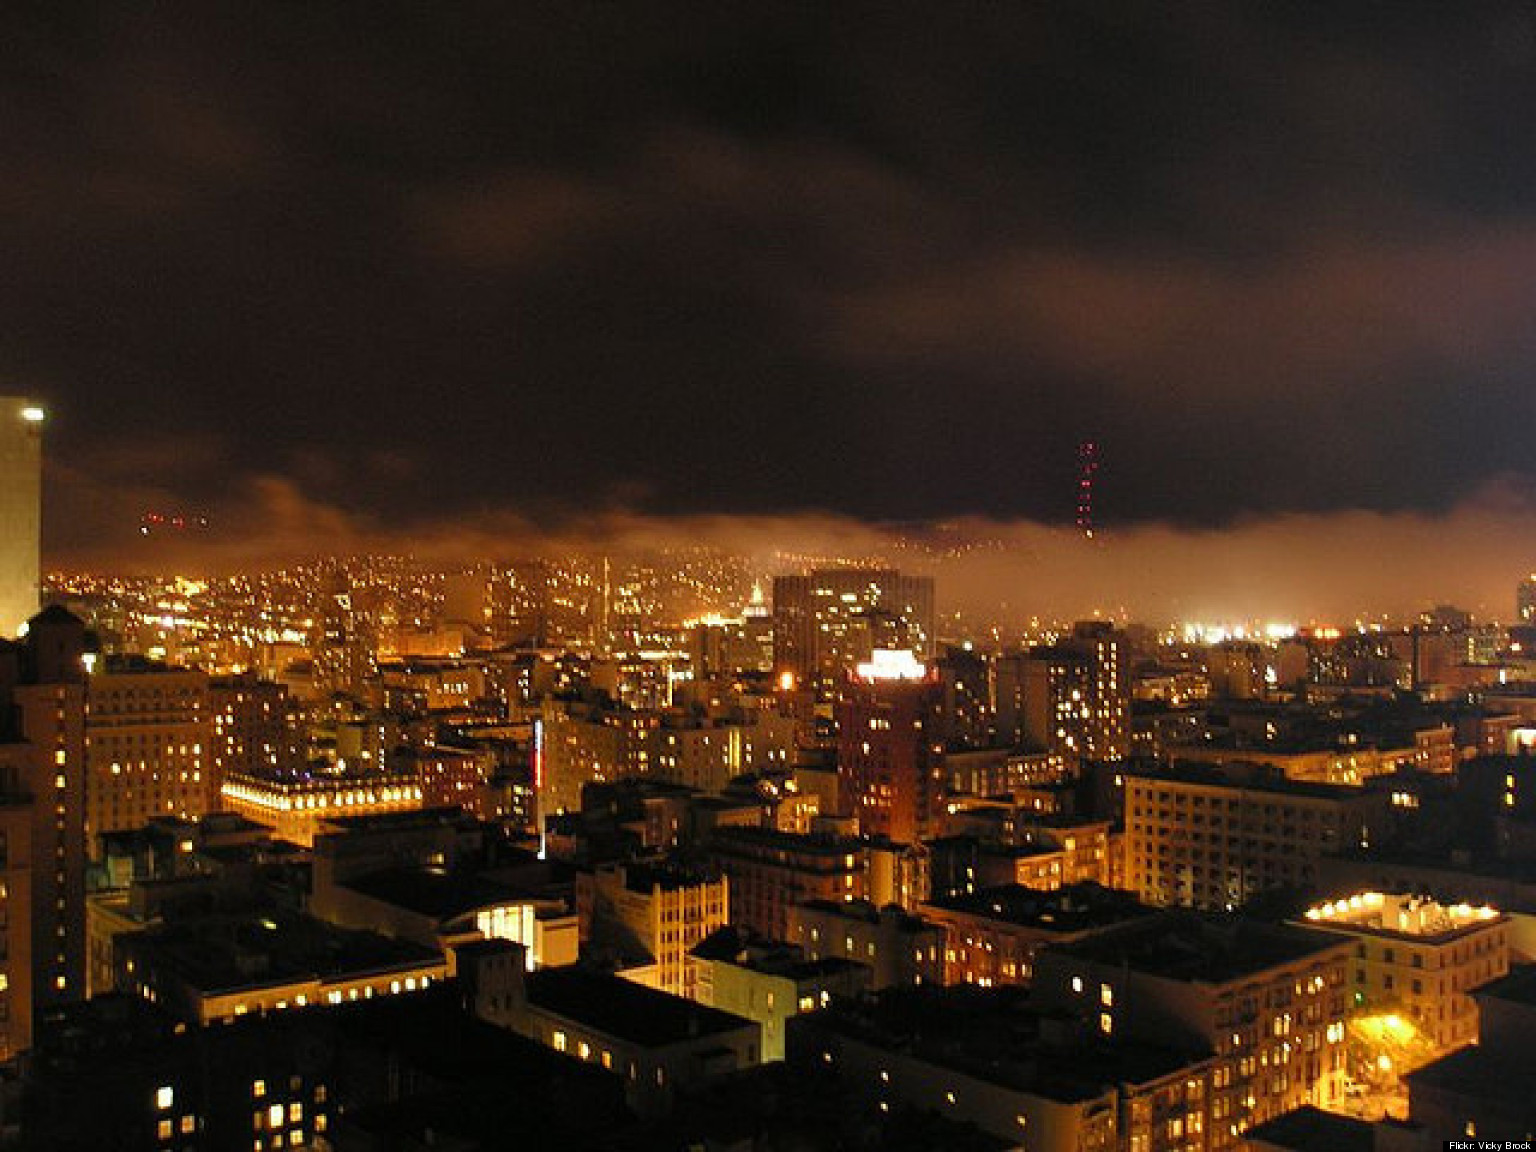 San Francisco Haunted Houses: The City's Eight Most Ghostly Locations (PHOTOS) | HuffPost1536 x 1152